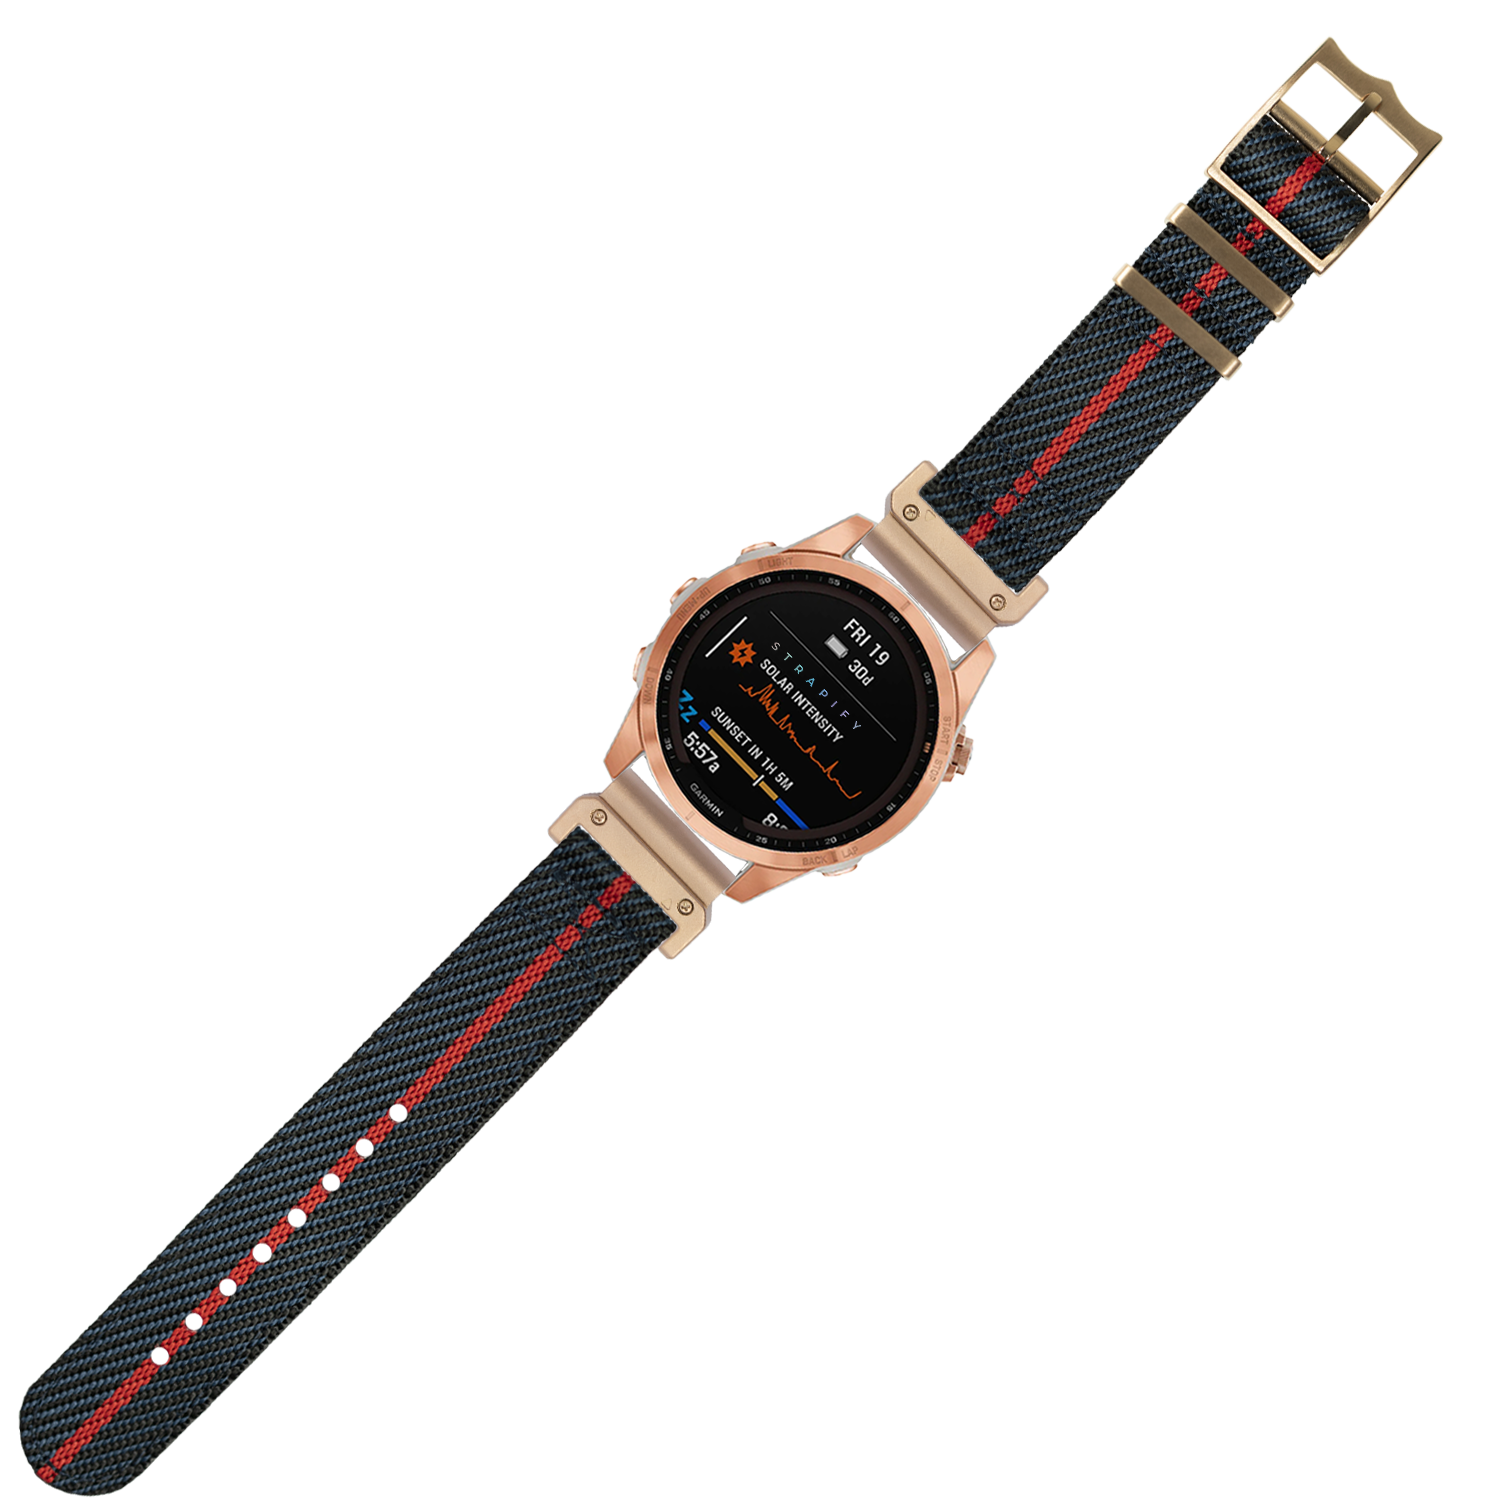 [QuickFit] Cross Militex - Night Blue / Red [Rose Gold Hardware] 22mm